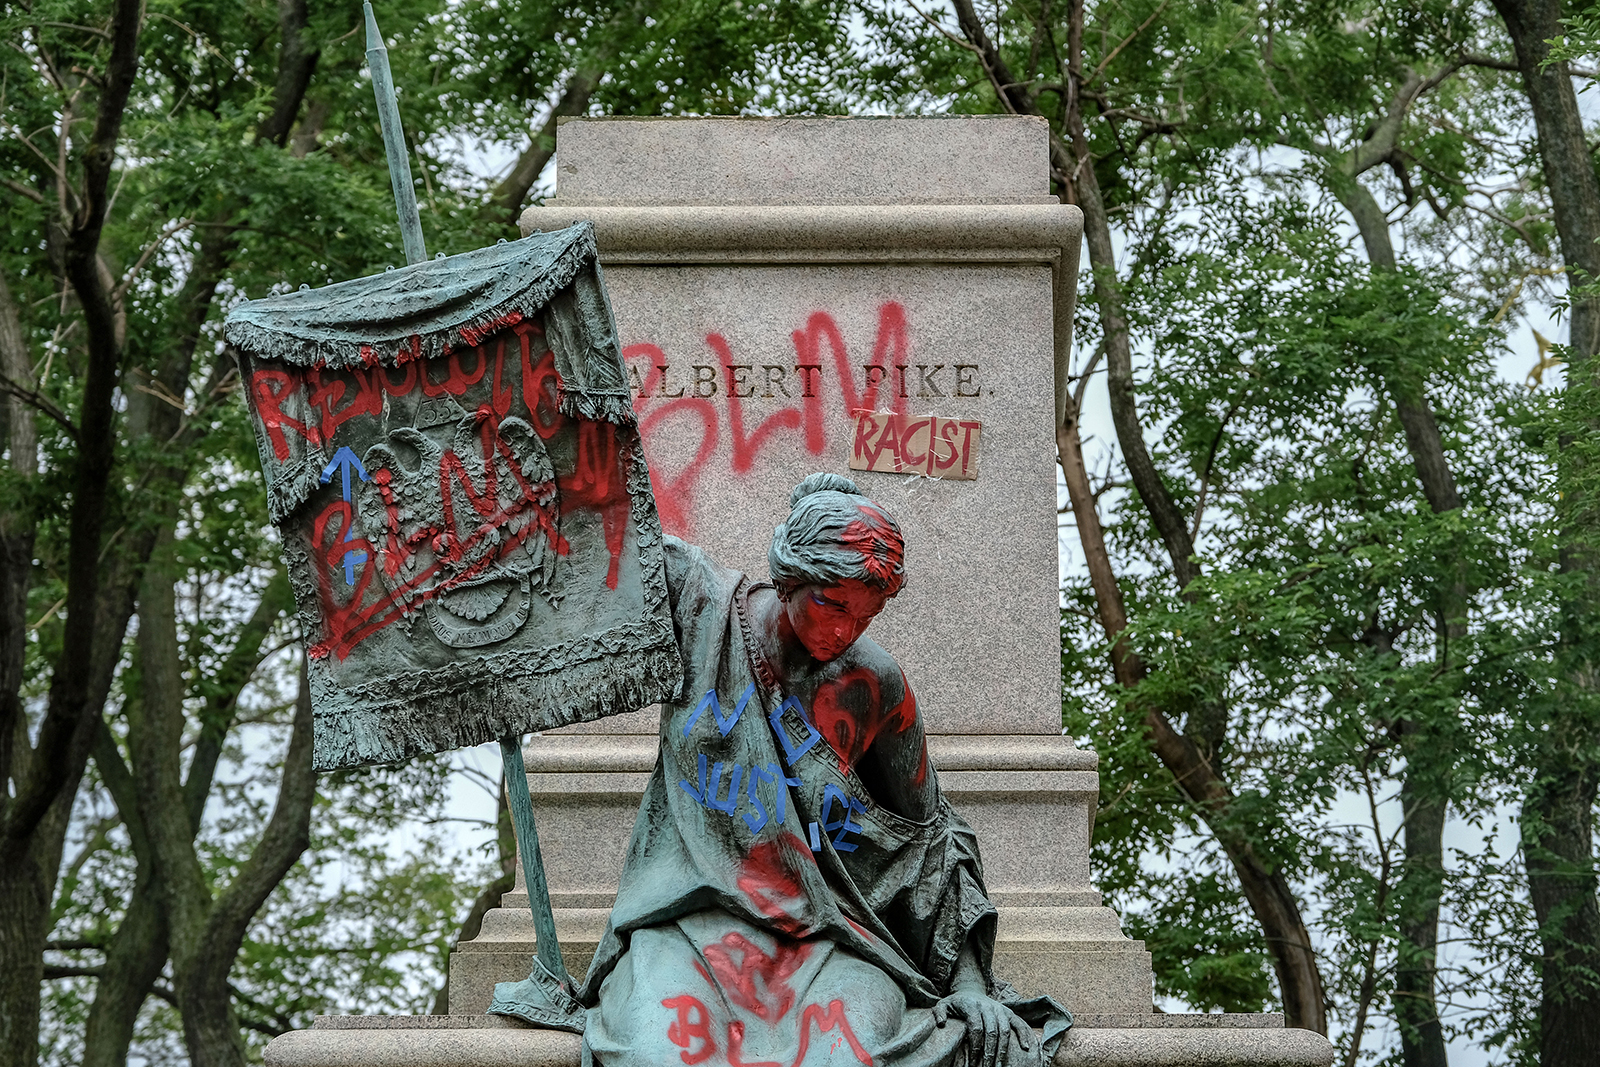 The pedestal where the statue of Confederate general Albert Pike remains empty after it was toppled by protesters at Judiciary square in Washington, DC on June 20.